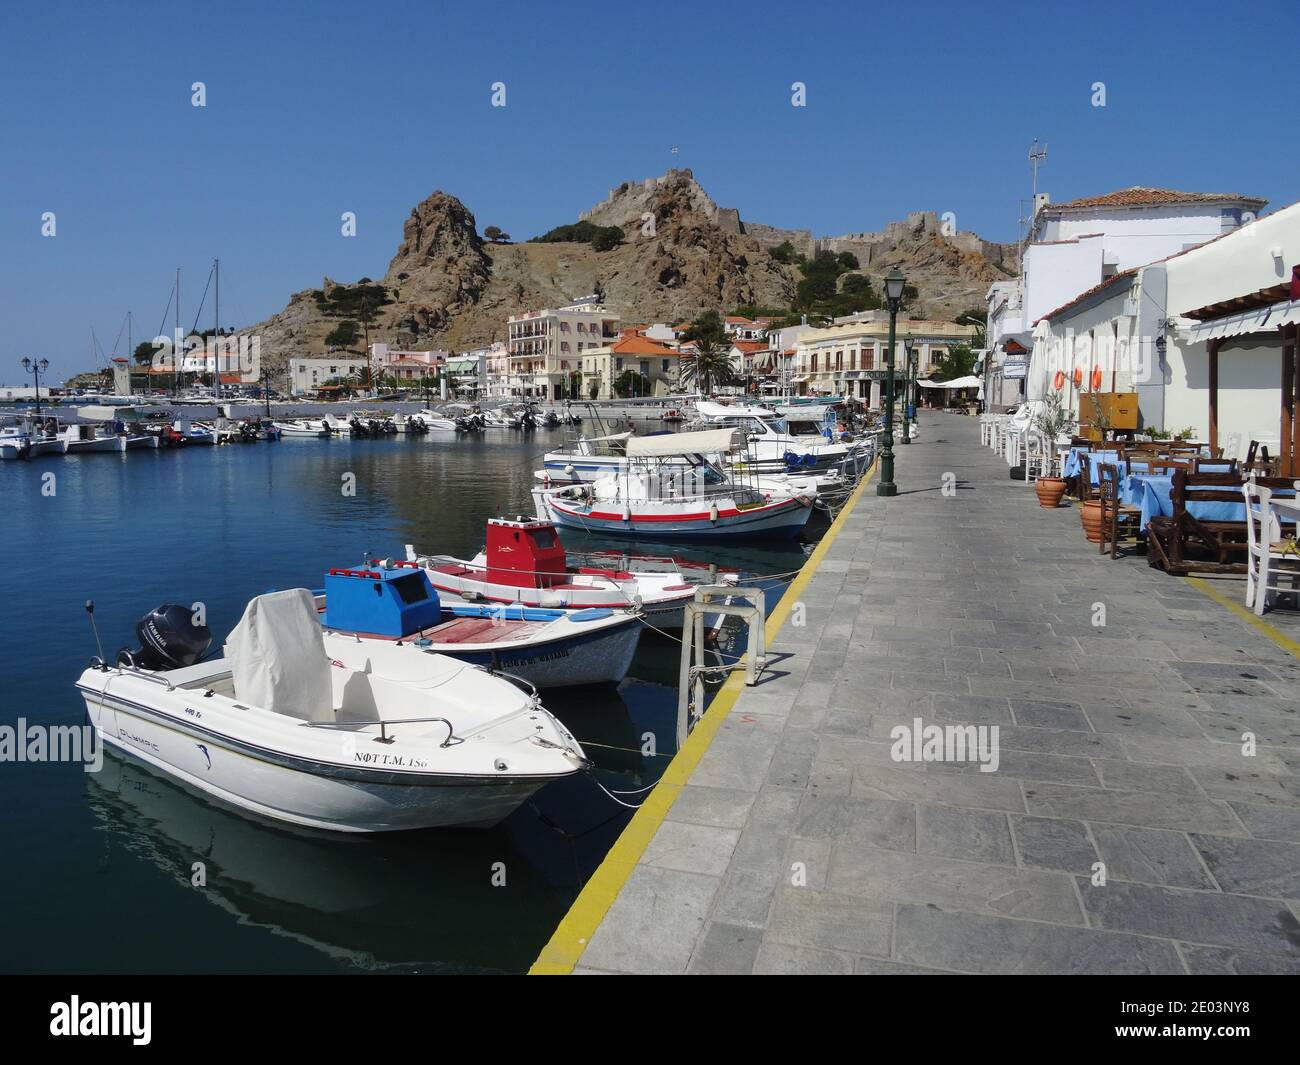 Lemnos Greece 15 September 2017   The Harbour at Myrina, Lemnos Island in the Greek Islands with views of Loutra in the background           Richard W Stock Photo